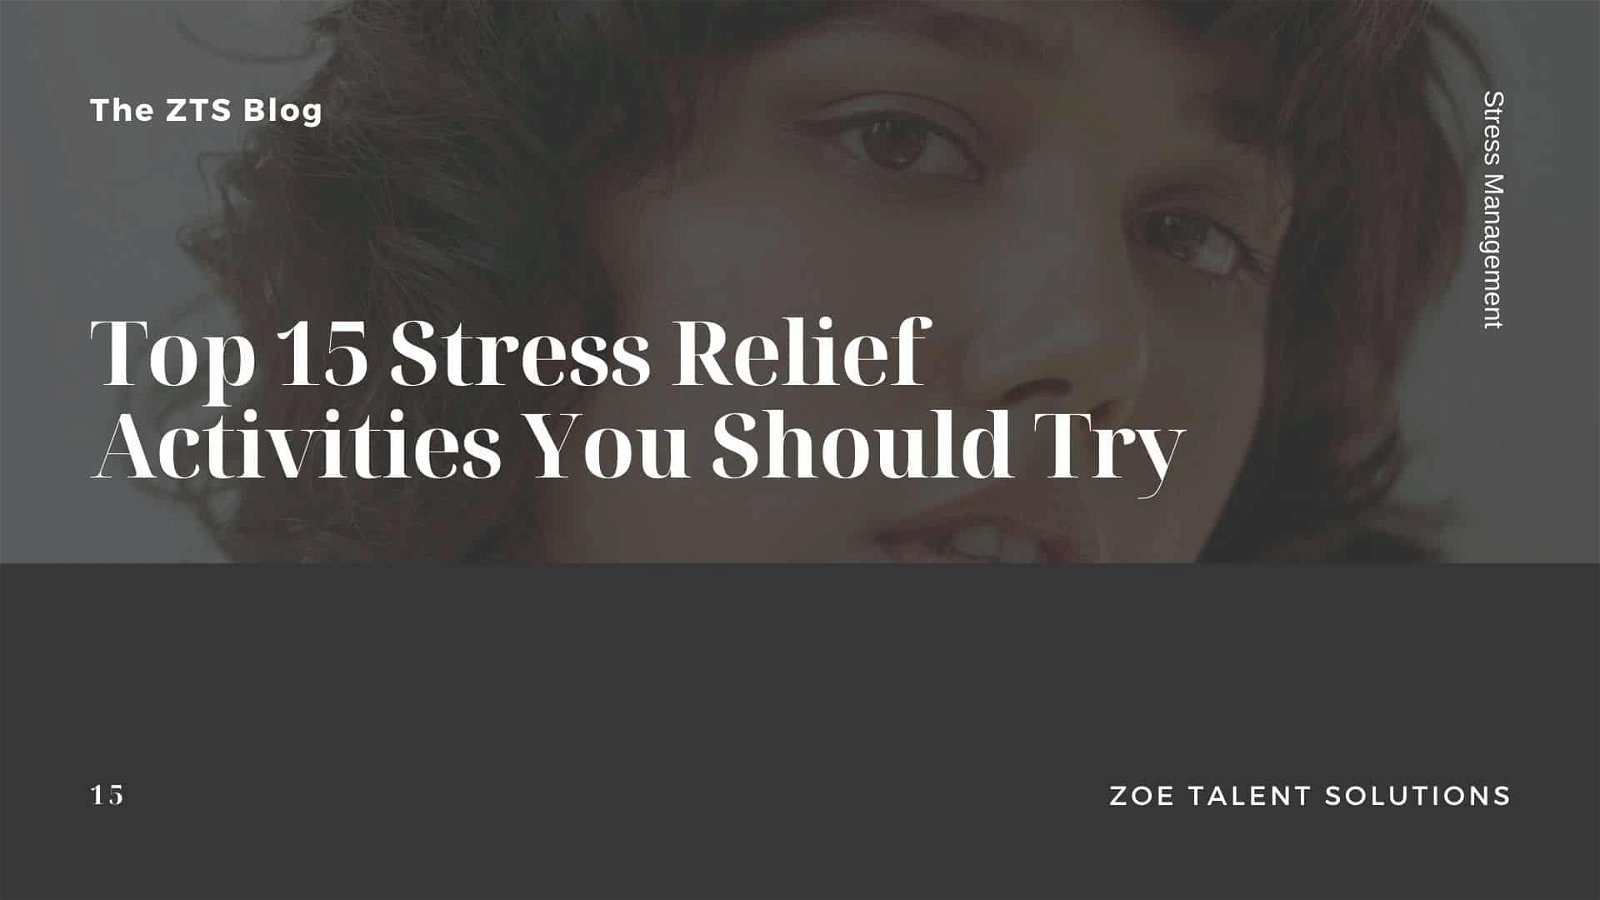 Top 15 Stress Relief Activities You Should Try